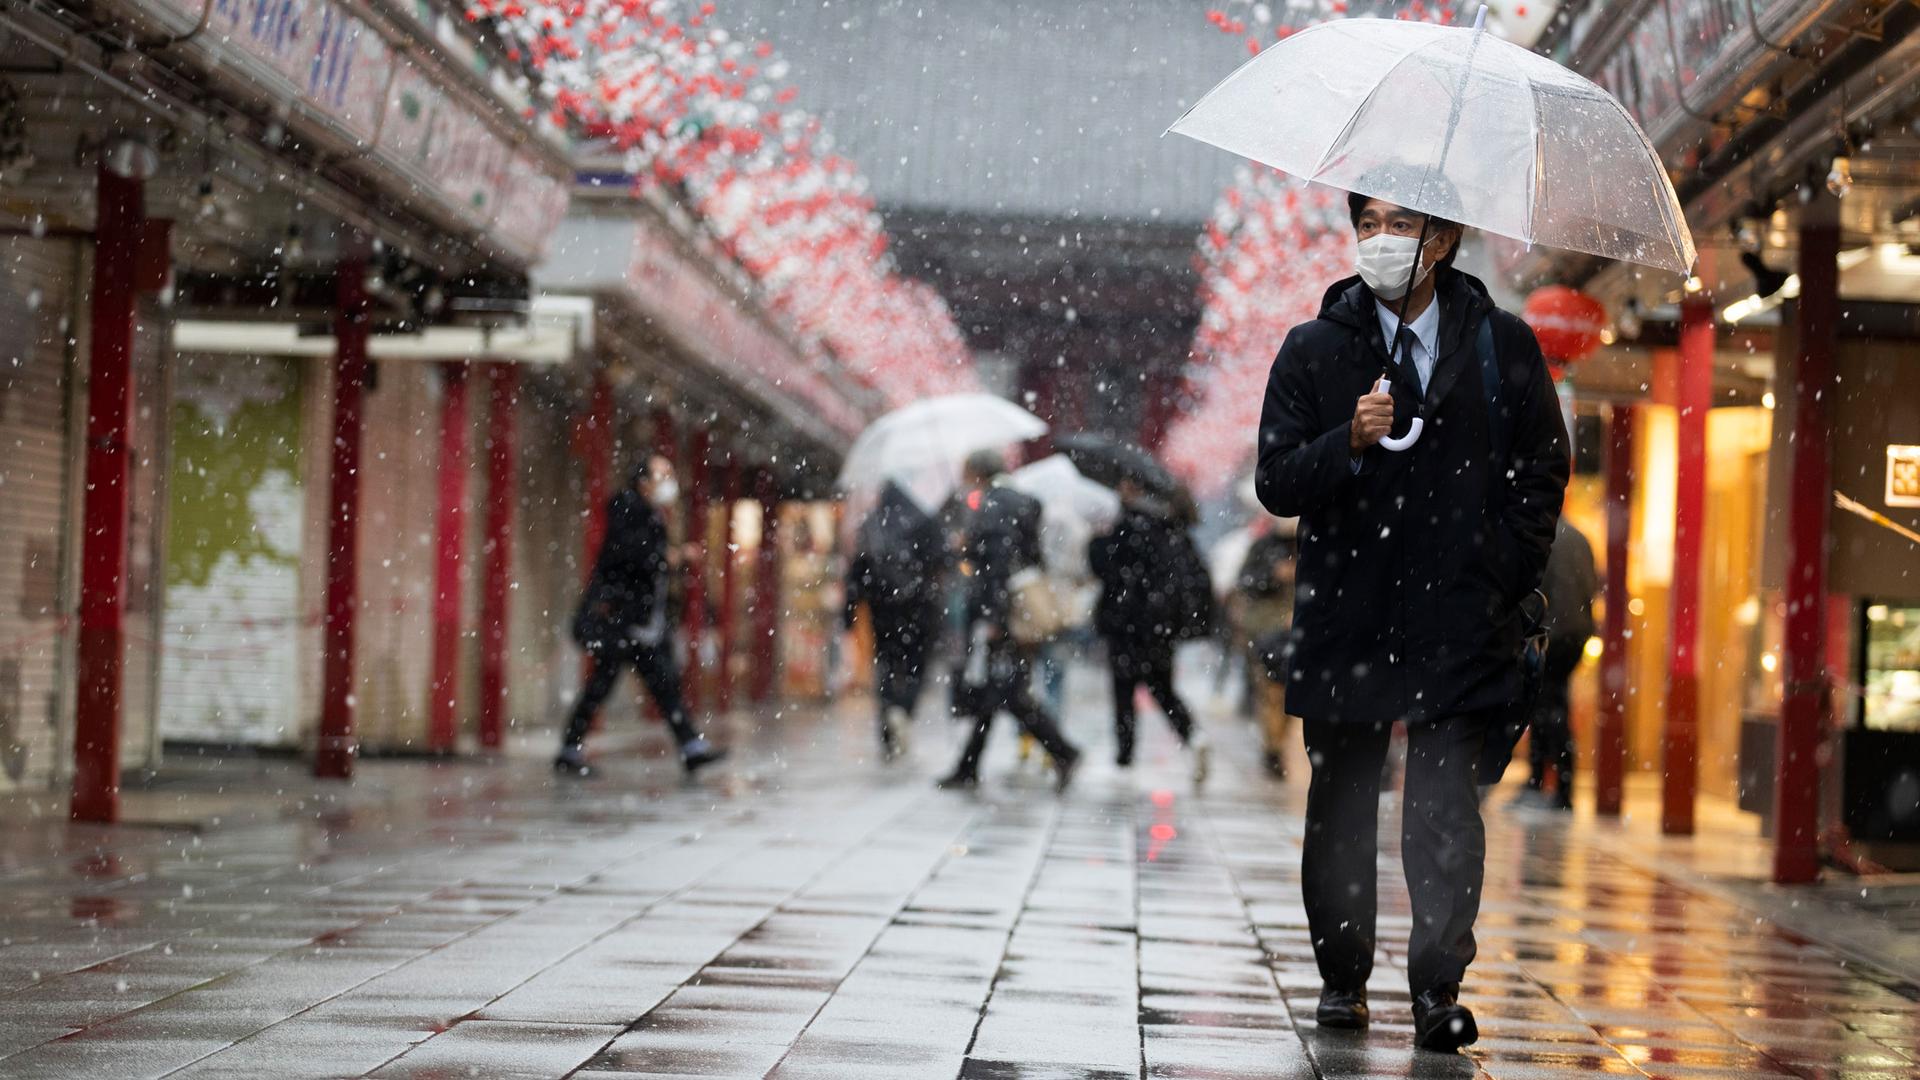 A man is shown carrying a clear umbrella and wearing a face mask while walking with his left hand in his pocket.